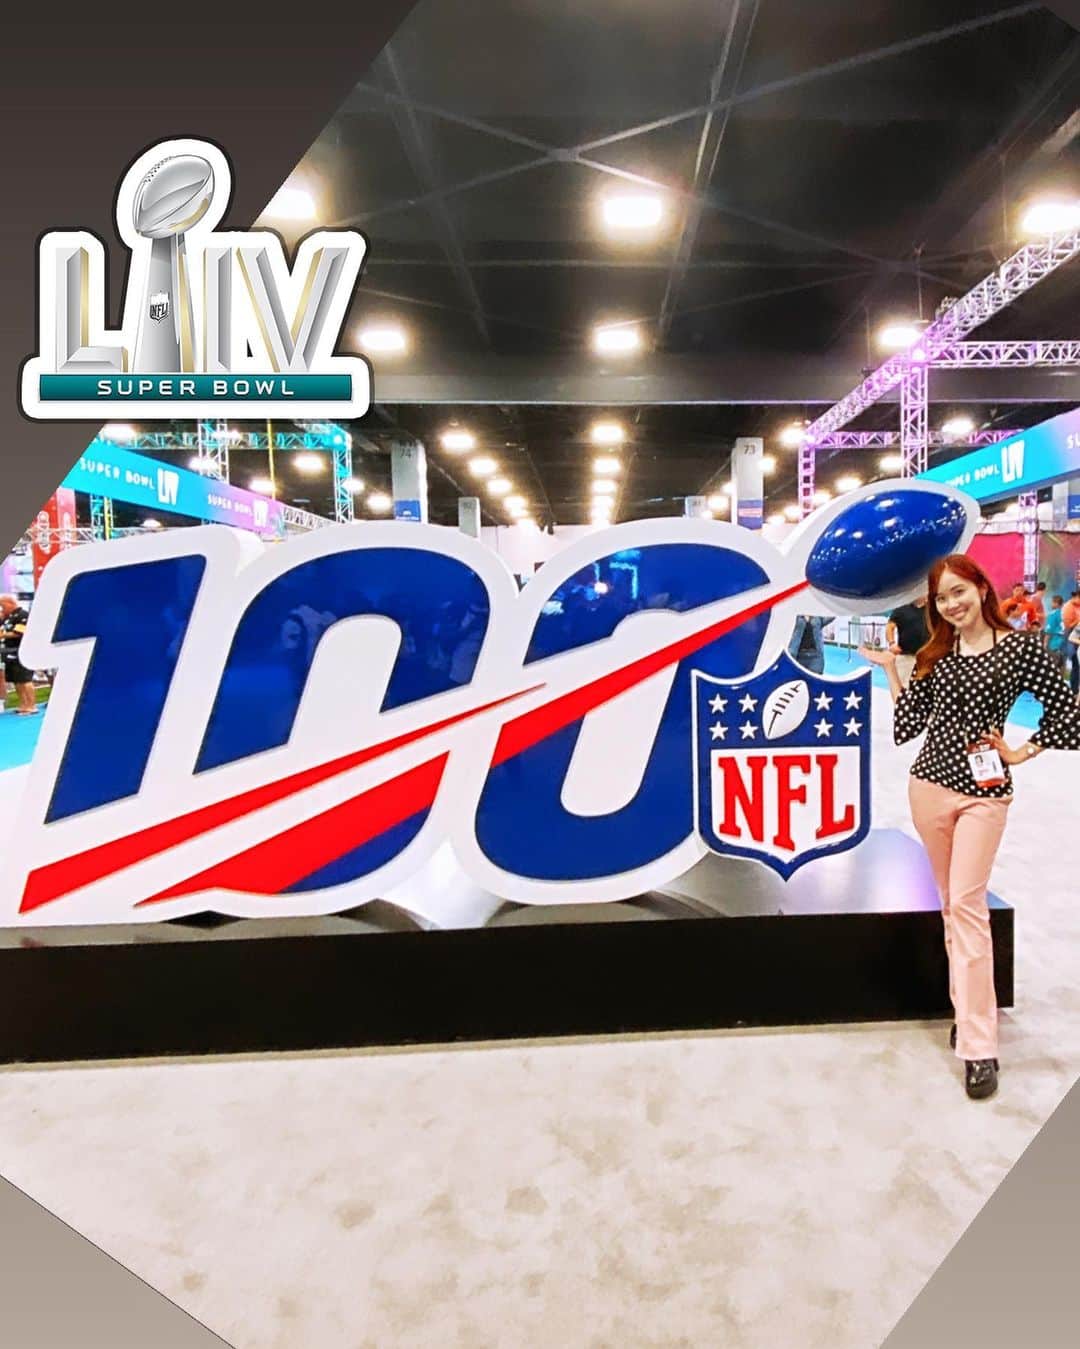 メロディー・モリタさんのインスタグラム写真 - (メロディー・モリタInstagram)「Reporting from Miami for SUPER BOWL and the 100th year anniversary of the @NFL!😆🏈✨ This year will be a tough match between the Chiefs who have made it to the Super Bowl for the first time in 50 years VS the 49ers with their seventh appearance. * Swipe for photos of this year's venue + interviews I conducted to Chiefs' star quarterback Patrick Mahomes and Tyreek Hill who have had a phenomonal season that led them to this stage + more players/legends! Mahomes' father was actually a professional baseball player in Japan as well which explains where his insane throws come from... but we'll have to keep our eyes peeled for what he'll show on the grand stage✨ * On the other hand, the 49ers' defense is highly skilled at slowing down the opponents' top weapons. Their head coach Kyle Shanahan will be making his Super Bowl debut and become the first ever father-son duo to make separate SB appearances. Will they be able to stop Mahomes and raise the Lombardi Trophy?! * I'm currently prepping and getting ready for the red carpet tonight with Oodori-san to interview all the star players. Wish us luck, and join in the fun for the final Sunday Night Football of the season!🔥 * 今年のSUPER BOWL開催地、マイアミに来ています！😄✨ 50年ぶりの出場となったChiefsと、7回目の出場となる49ersの対戦。 * 写真は会場、チーフスのスターウォーターバックのPatrick Mahomes選手、WRのTyreek Hill選手などへの以前のインタビュー風景です！ * ‪2018-2019シーズンのLeague MVPでもあるマホームズ選手ですが、プロ野球選手で日本でも活躍されたお父様譲りの肩で、このスーパーボウルでも目を疑うようなスーパープレーを魅せてくれるのでしょうか!? * 対する49ersはディフェンス力で、そのマホームズ選手たちの勢いあるプレーを止めることが出来るのかに注目！優秀コーチであるKyle Shanahan HCはNFL史上初、親子2代スーパーボウル制覇となるのかにも期待です👀‬ NFL倶楽部ではオードリーさんの後ろから、良い取材＆選手インタビューができるように頑張ります‼️💪 そして、スーパーボウル・サンデー、是非日テレでご覧ください✨ #NFL #NFLclub #SuperBowl #superbowl2020 #superbowlliv #Chiefs #49ers #選手インタビュー」2月1日 23時13分 - melodeemorita